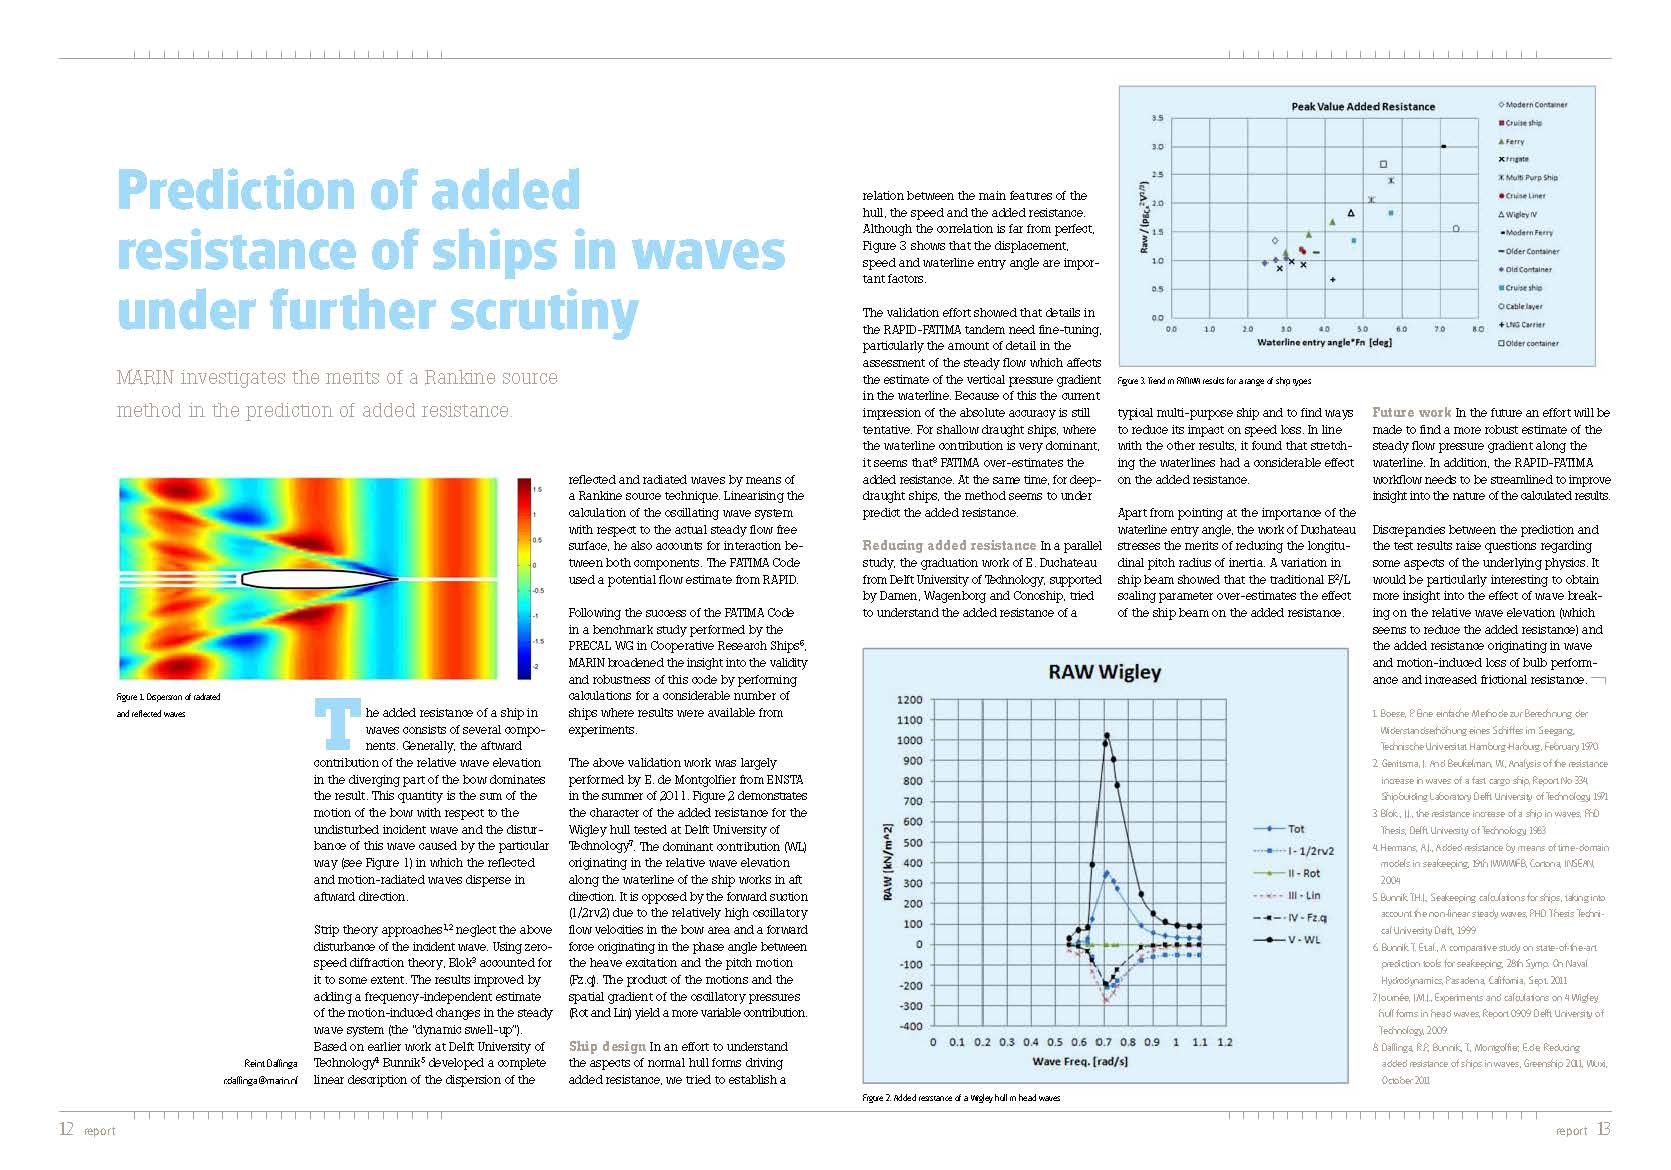 Prediction of added resistance of ships in waves under further scrutiny